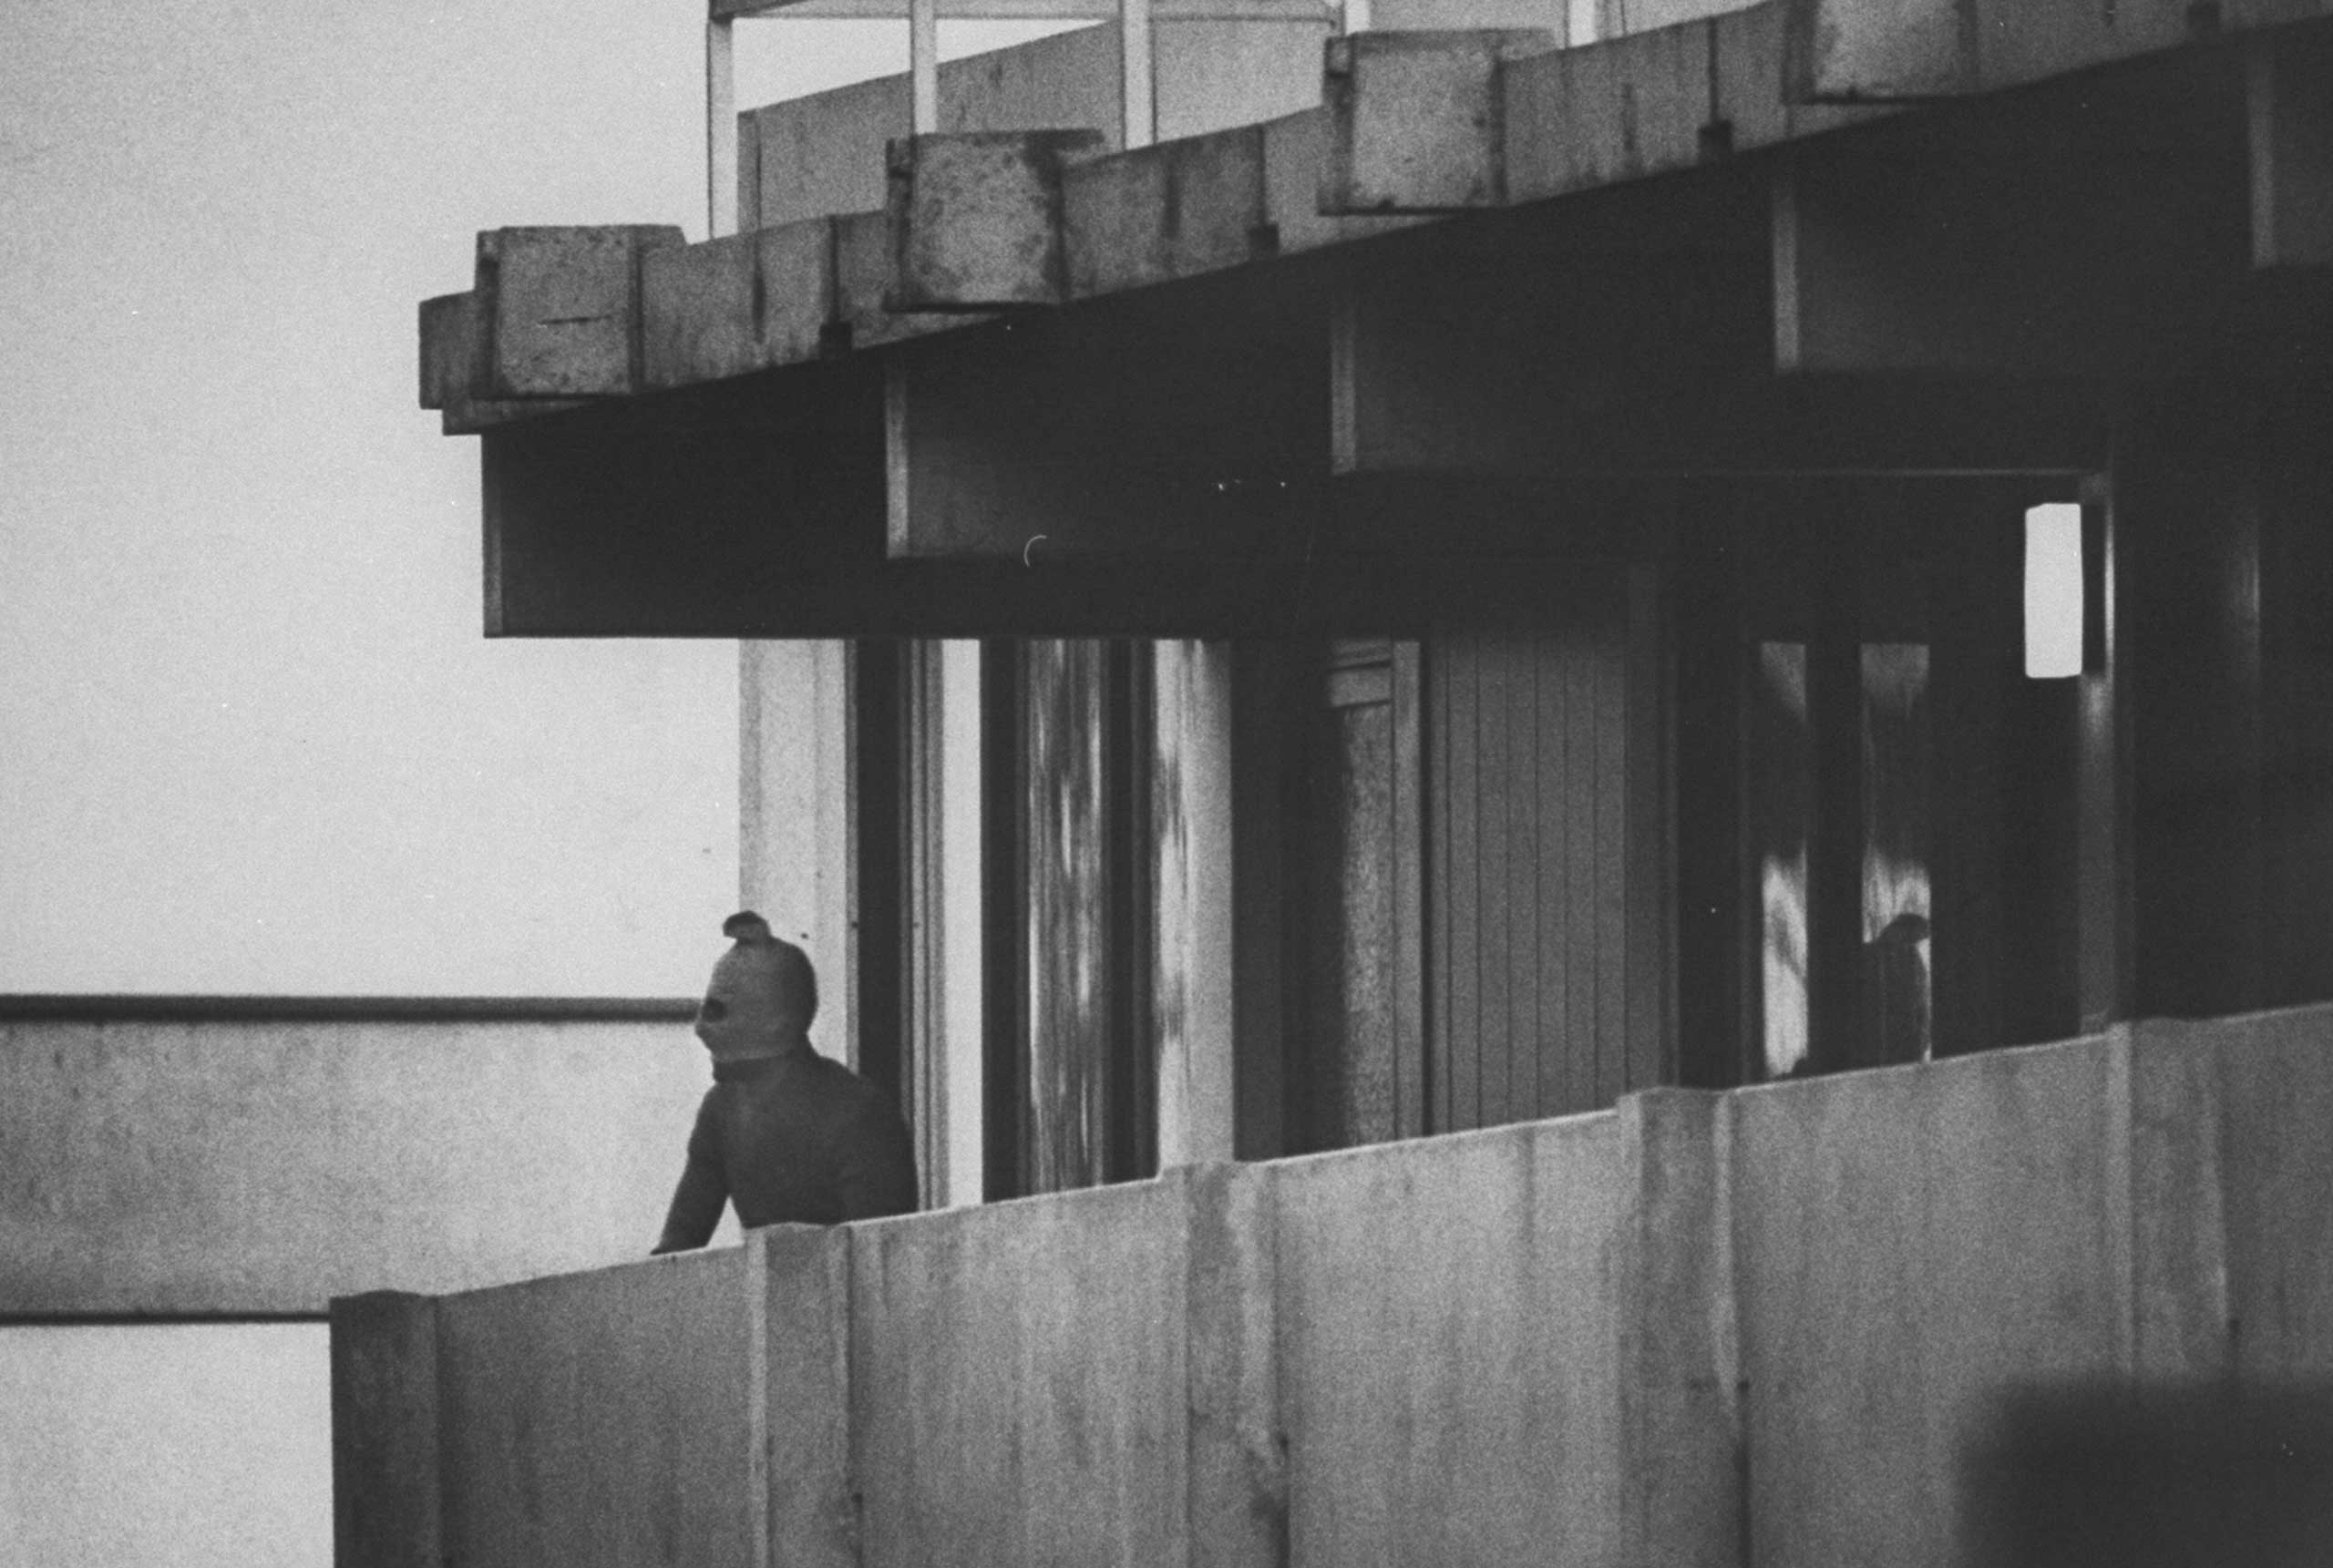 1972 | A masked Palestinian terrorist looks out from a balcony of the athletes' housing complex during the Munich Summer Olympics. On September 5, eight Palestinian guerrillas took 11 Israeli athletes and coaches hostage, and subsequently murdered all of them, in what came to be known as the  Munich Massacre  — the most infamous and violent outrage in Olympic history. Originally published in the September 15,1972, issue of LIFE.